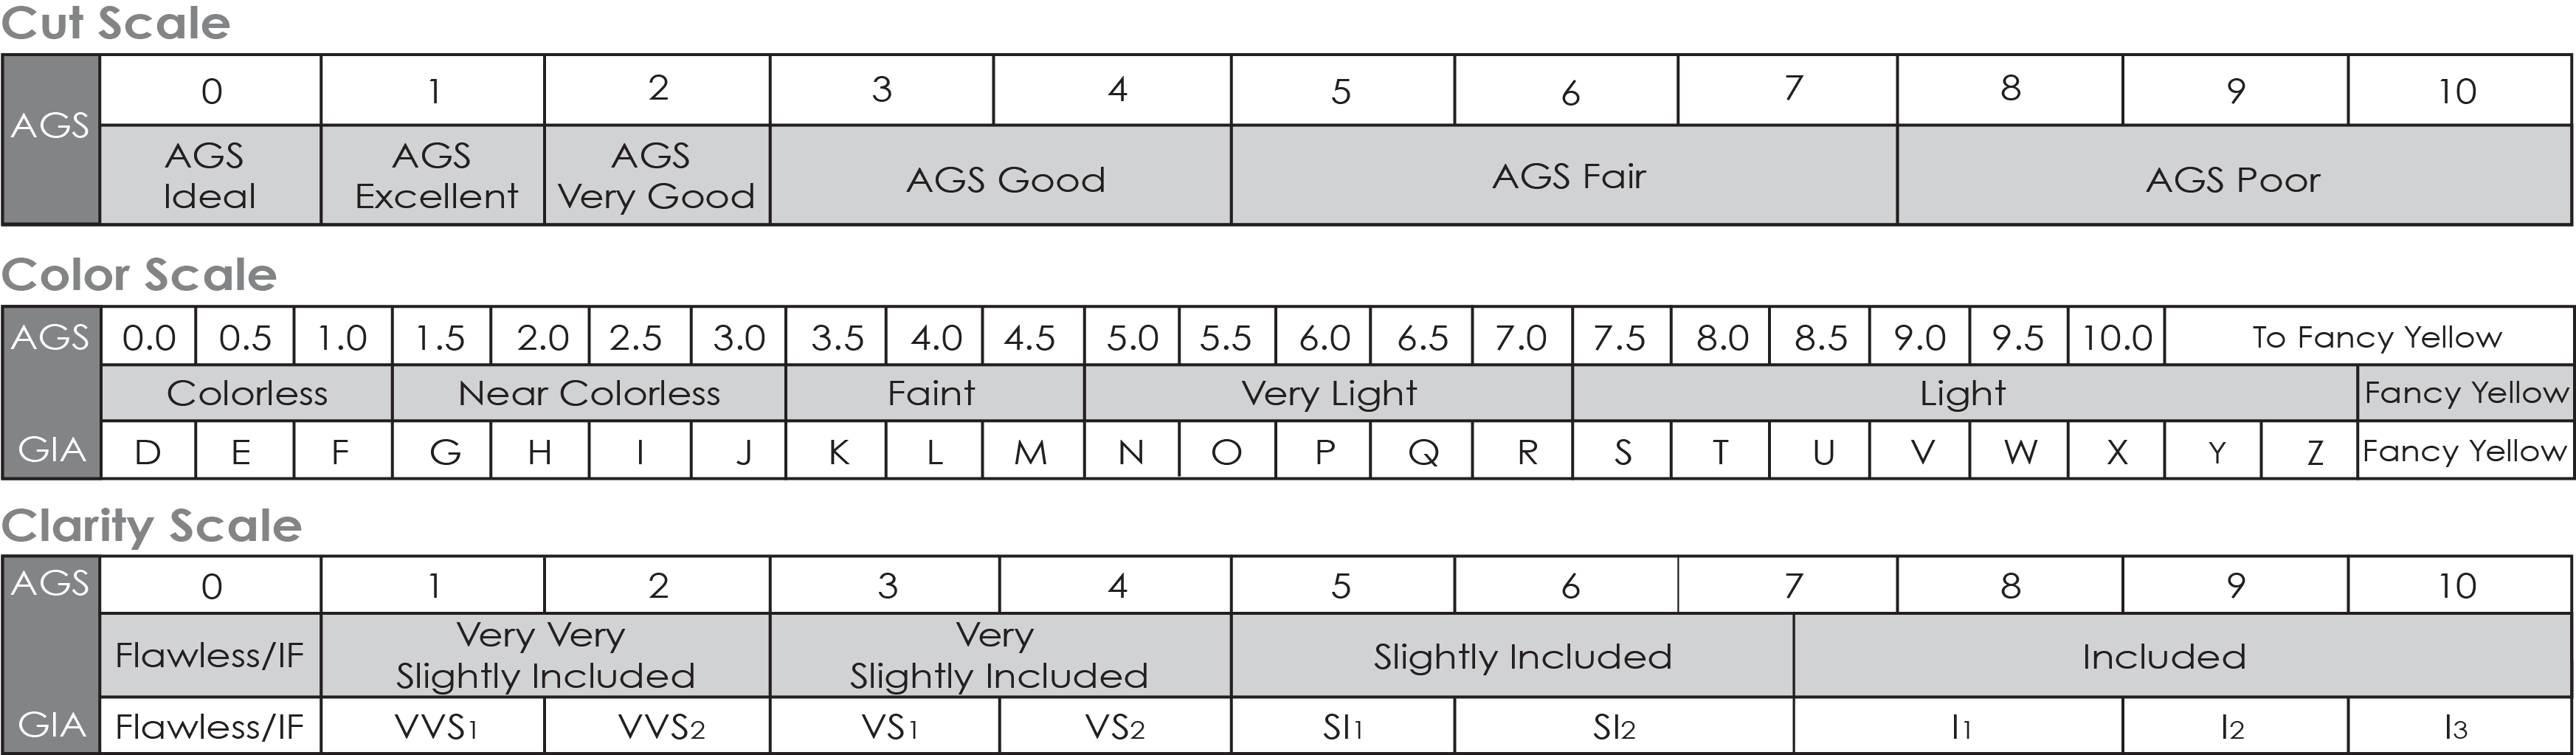 AGS Grading Scales